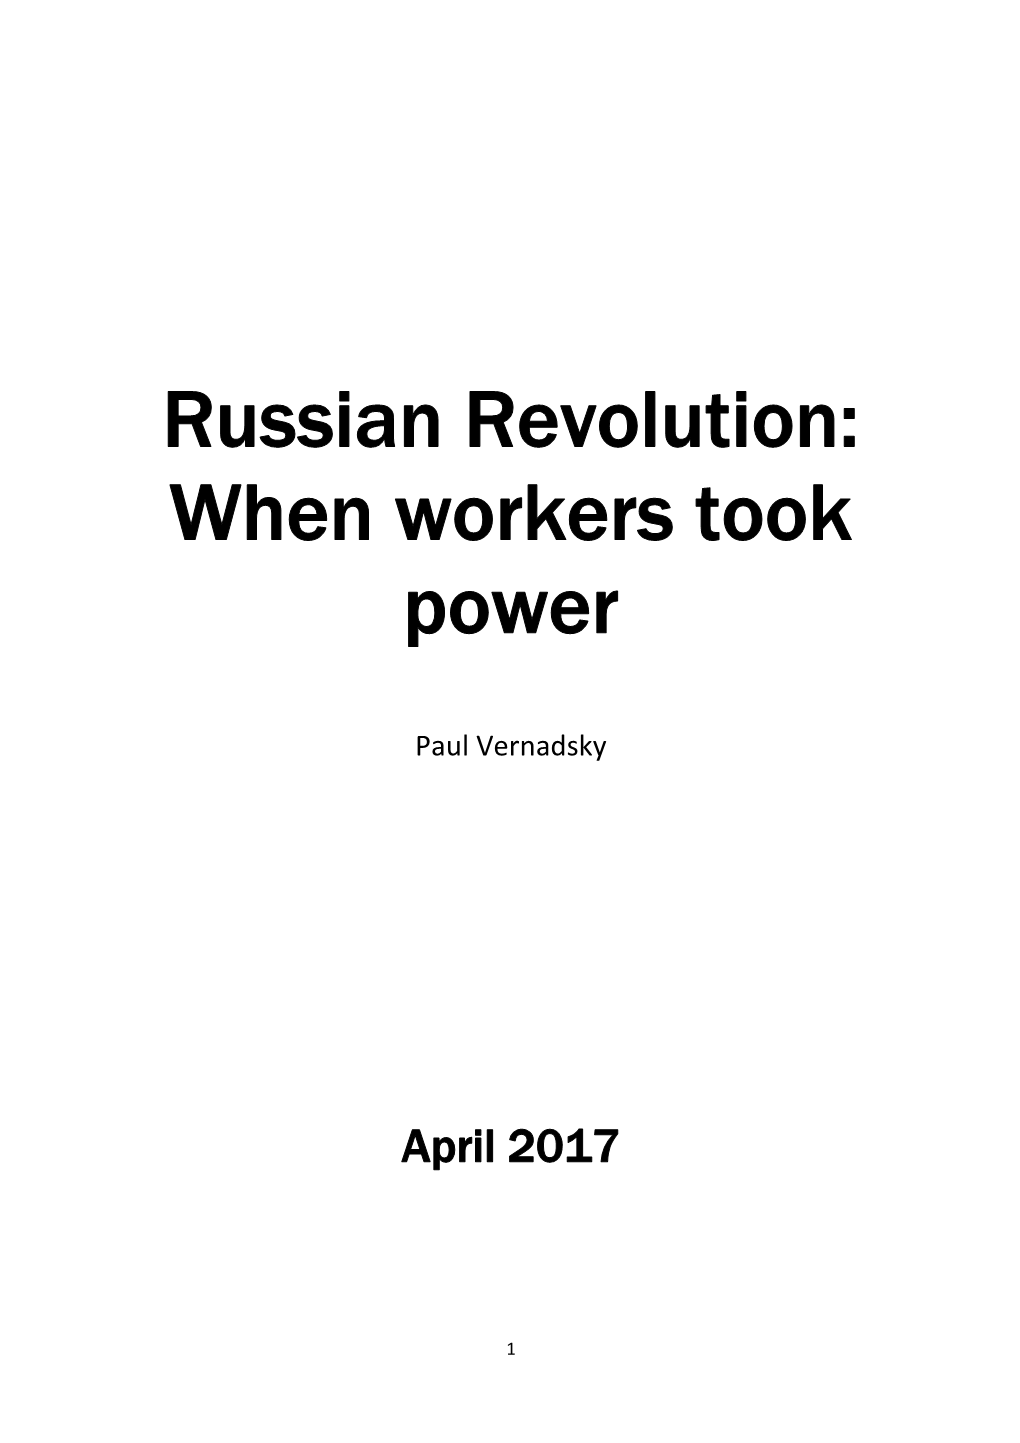 Russian Revolution: When Workers Took Power